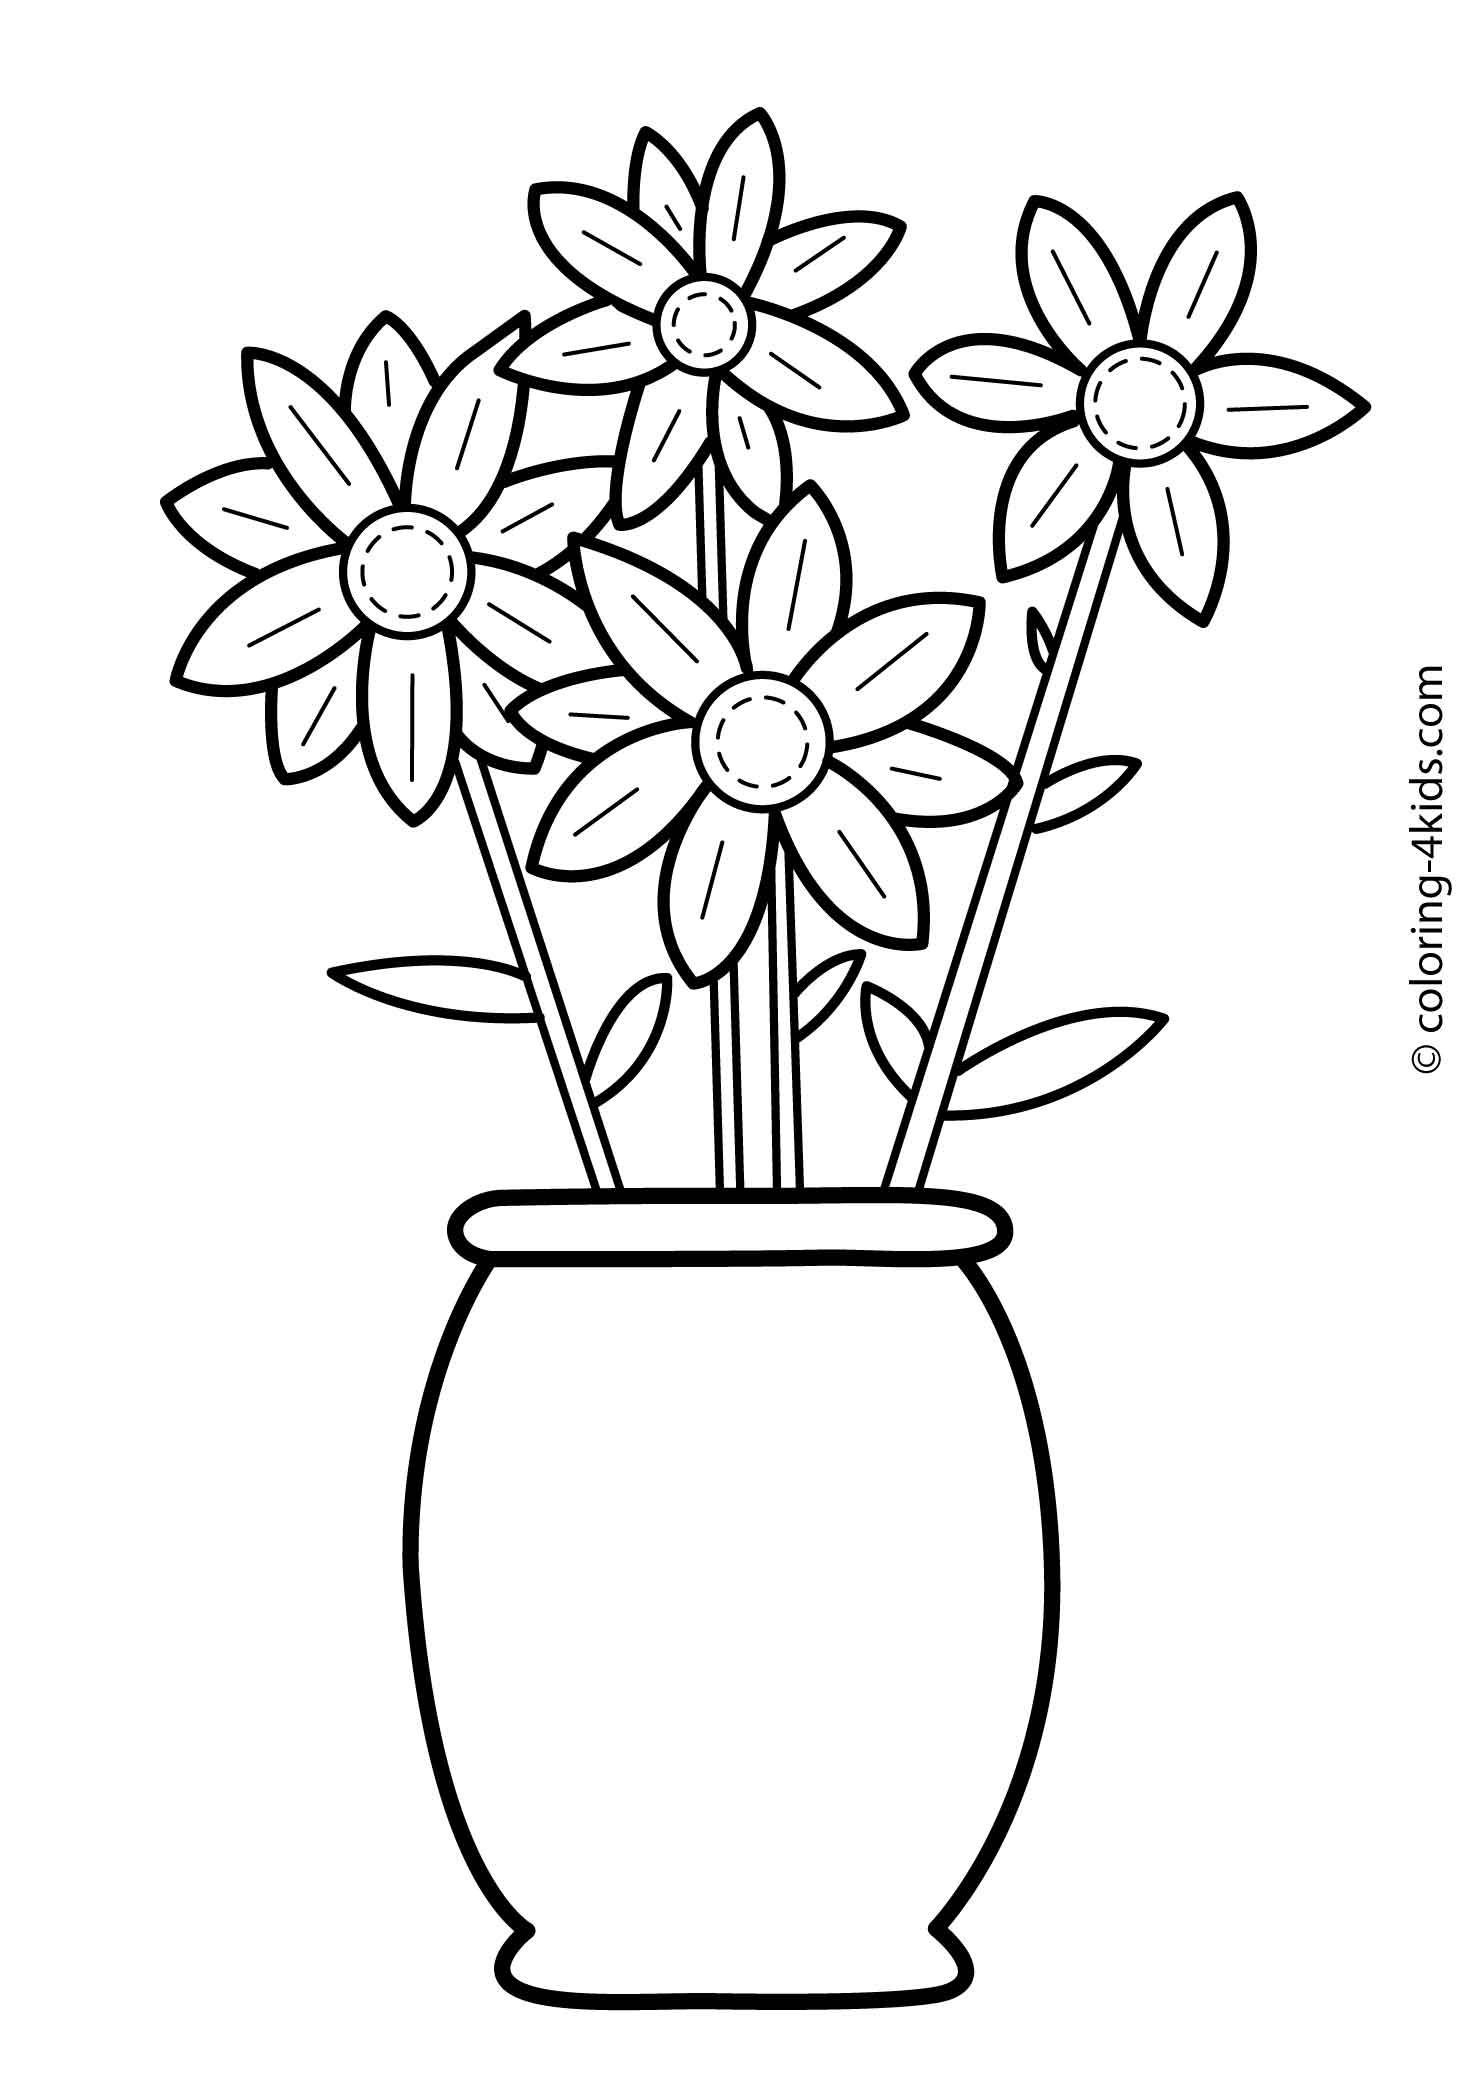 Flowers coloring pages for kids, printable, 6 | Flower coloring pages, Flower  coloring sheets, Printable flower coloring pages